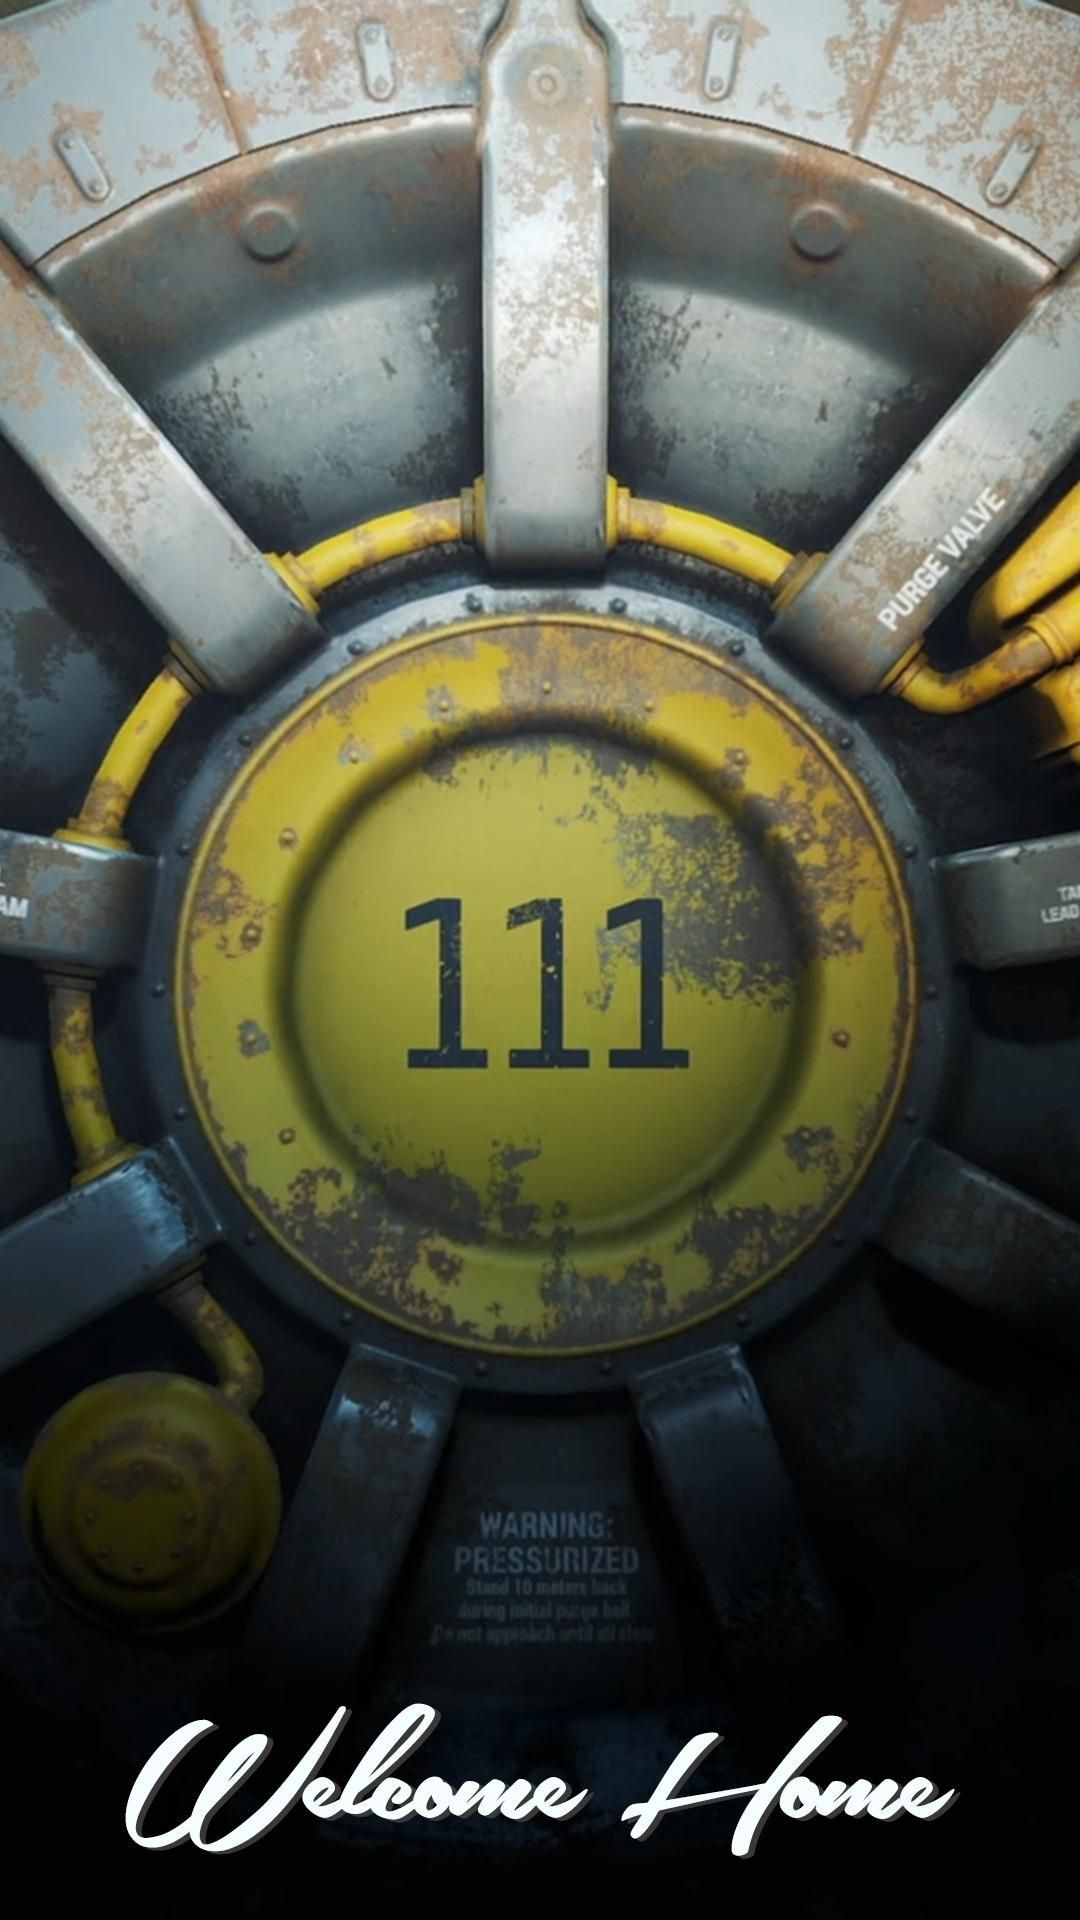 1080x1920 Fallout Wallpaper Images Lovely New Fallout 4 Mobile Wallpapers Pinterest  Of Fallout Wallpaper Images Luxury Fallout